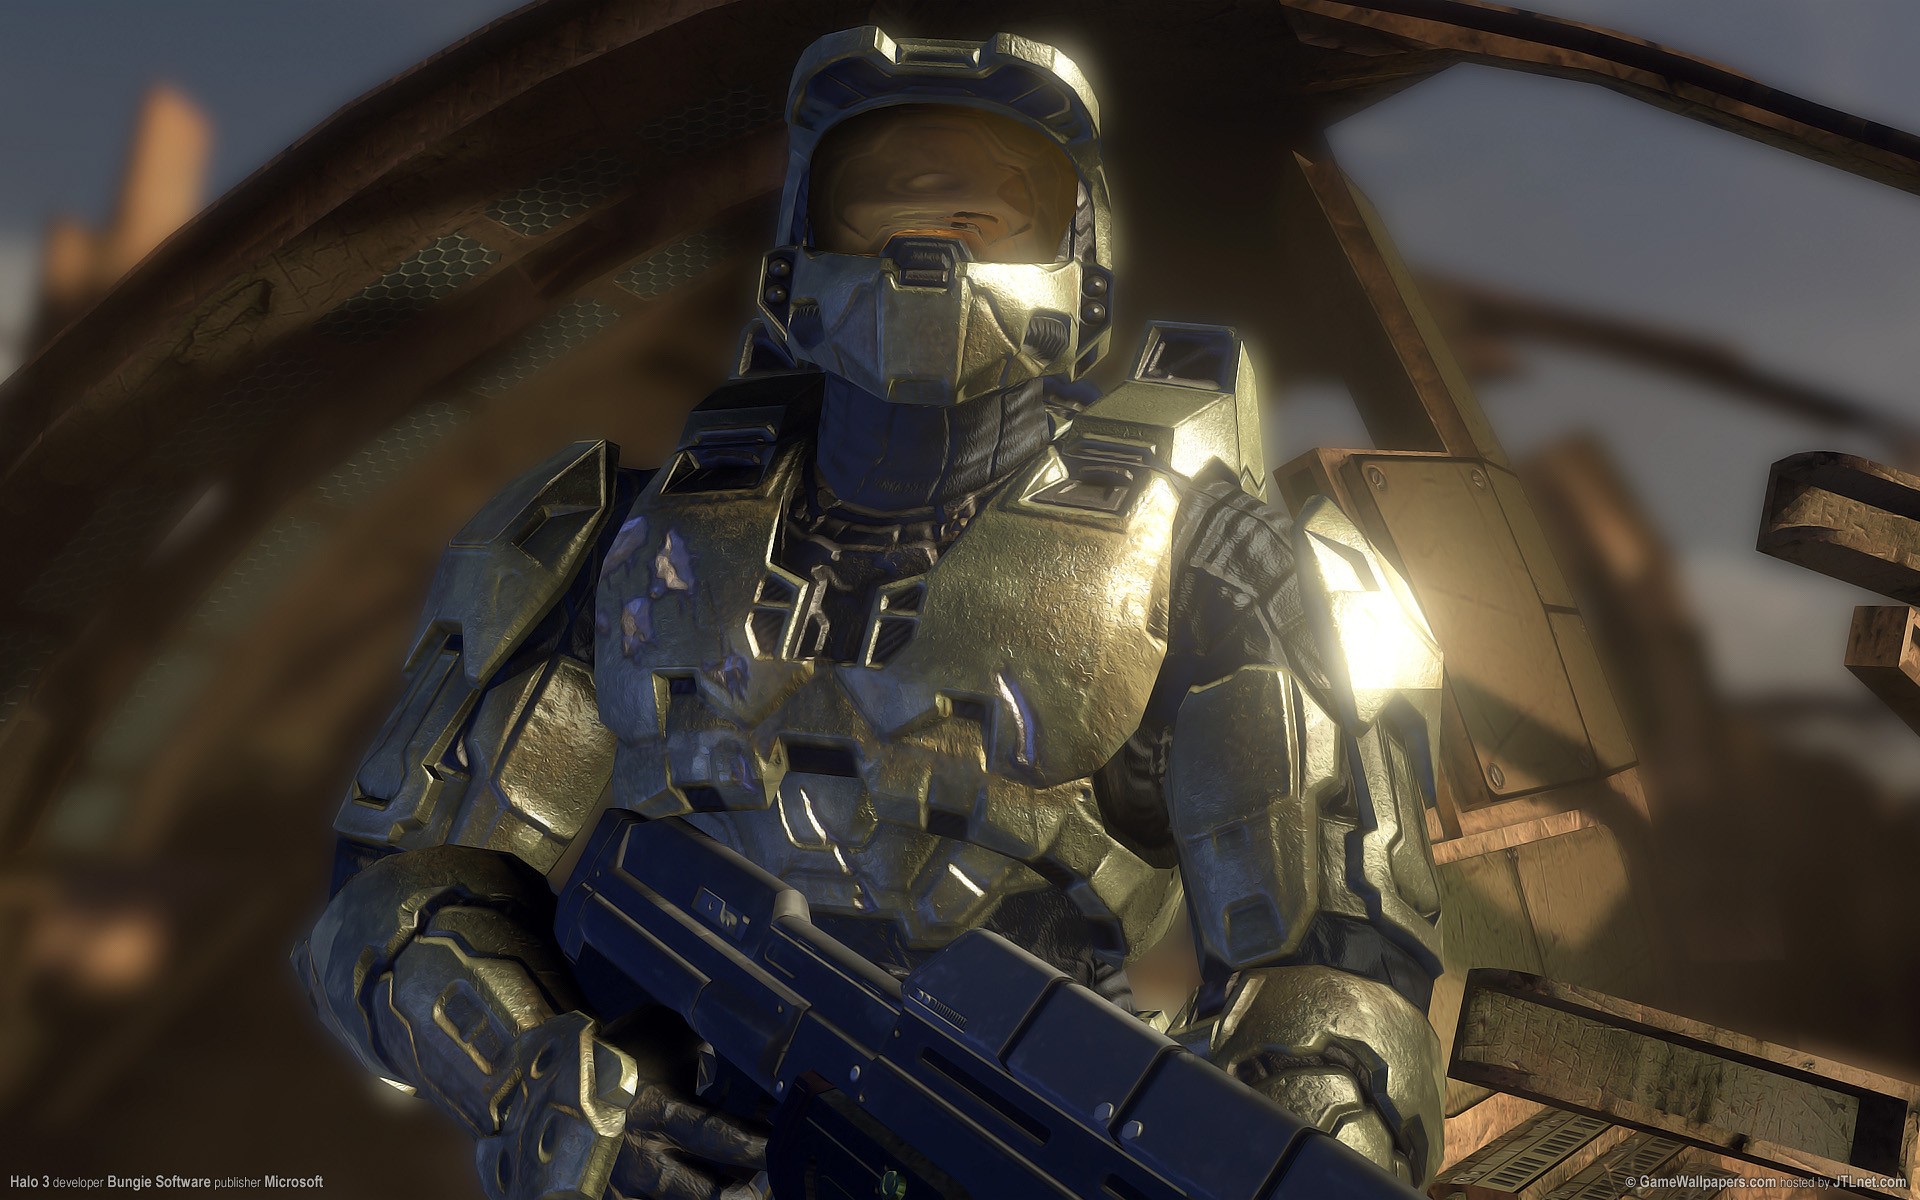 General 1920x1200 Halo 3 Halo: The Master Chief Collection video games video game art Bungie science fiction Master Chief (Halo) armor video game characters